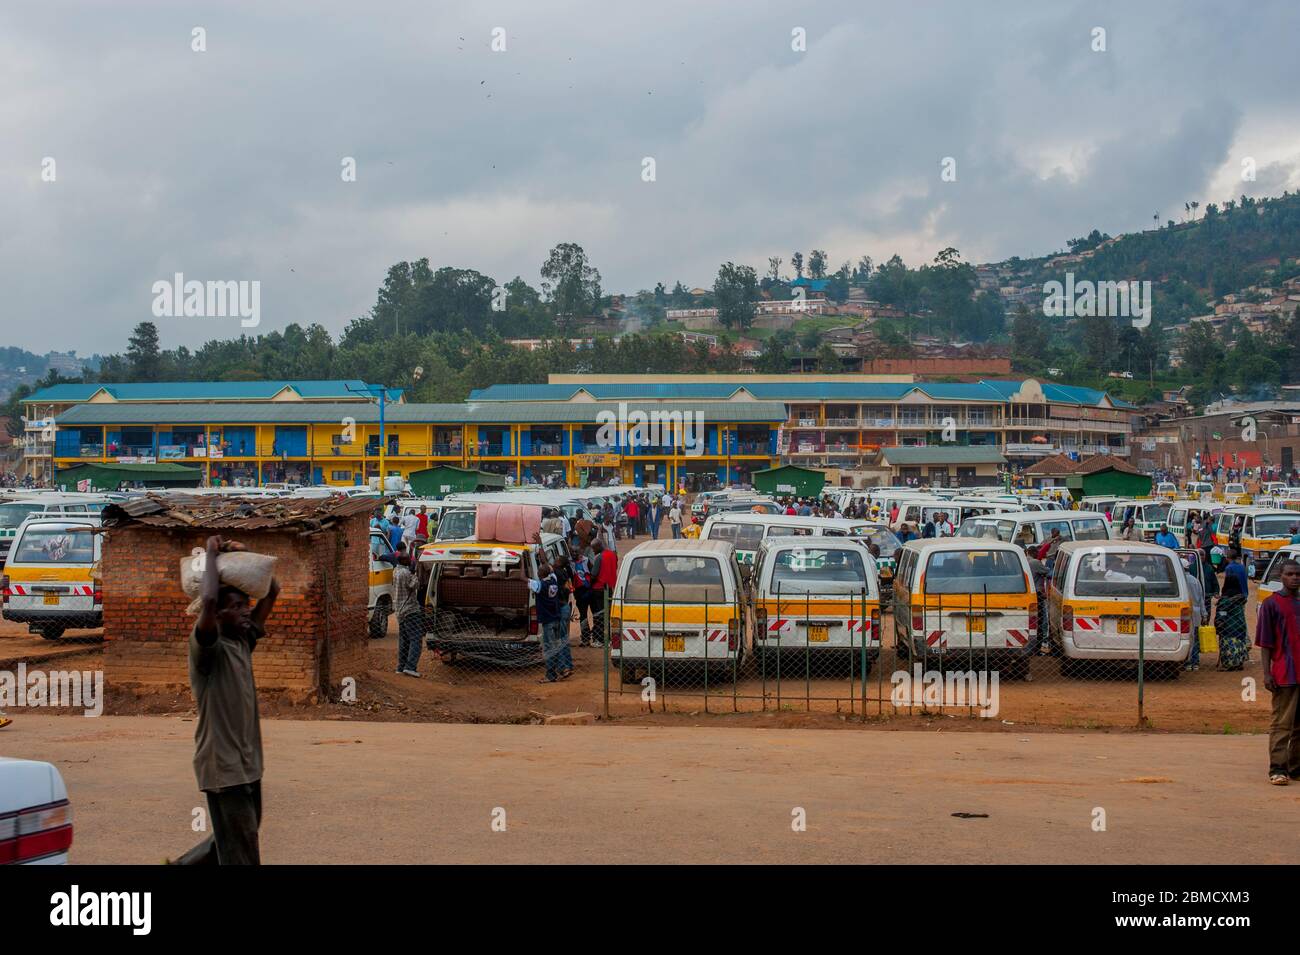 Street scene with a bus terminal in Kigali, the capital and largest city of Rwanda. Stock Photo